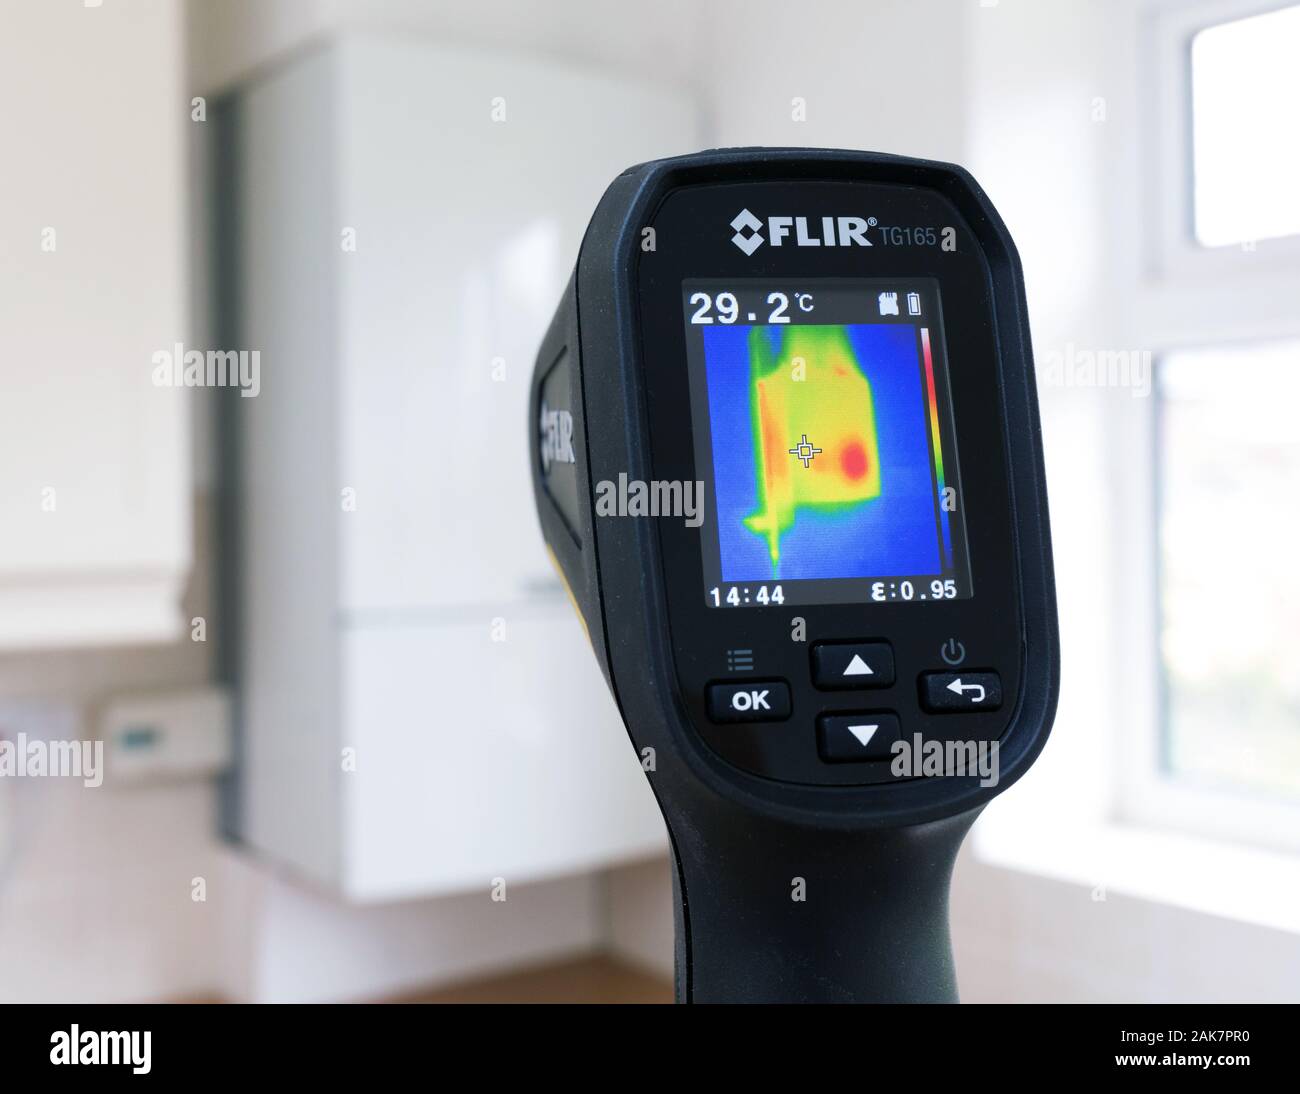 Thermal image camera being used to check temperature of gas heating boiler Stock Photo